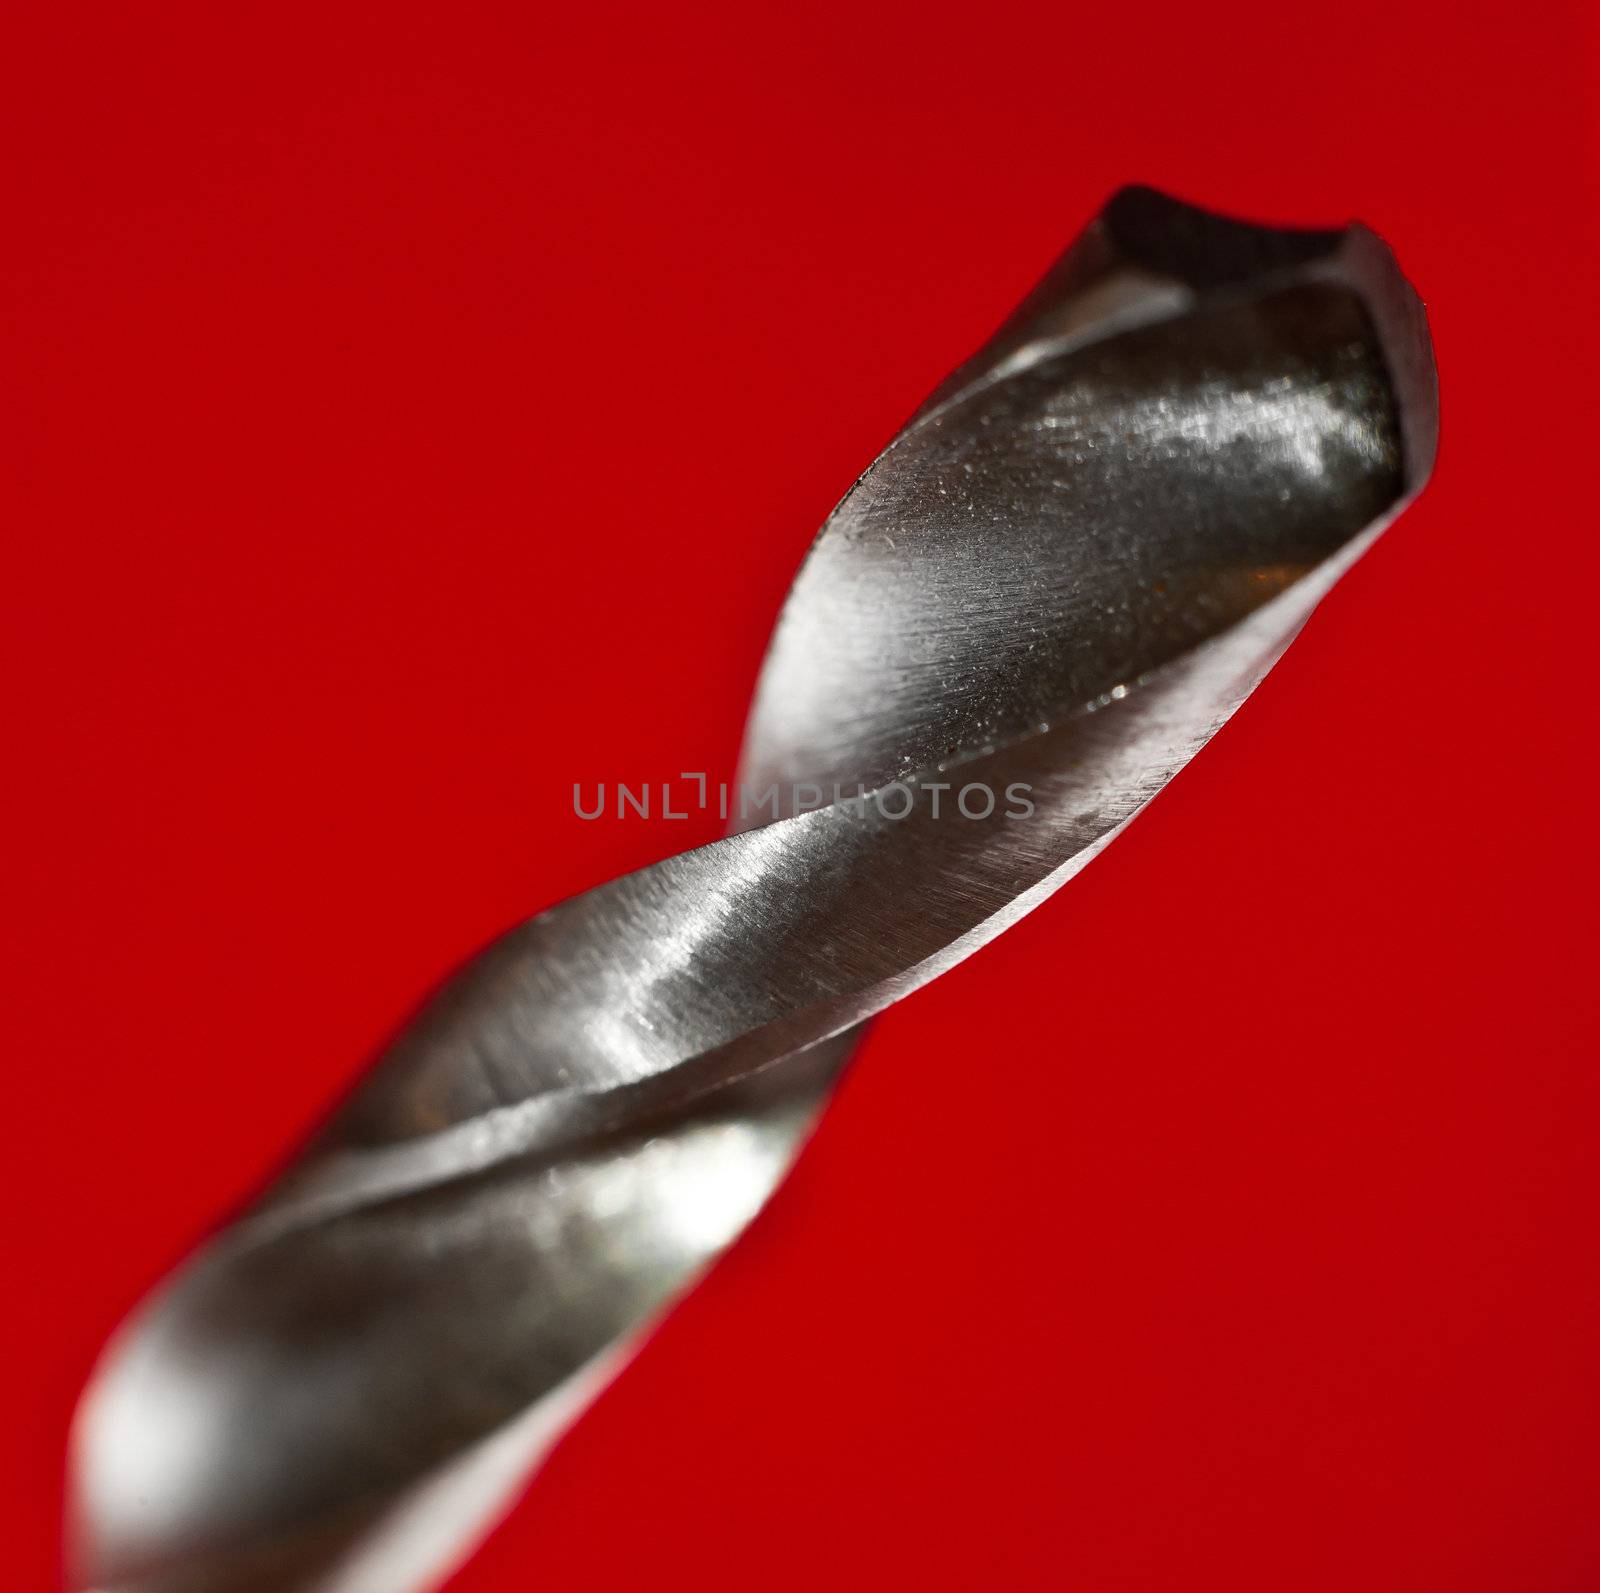 macro closeup of a metal drilling bit on red background